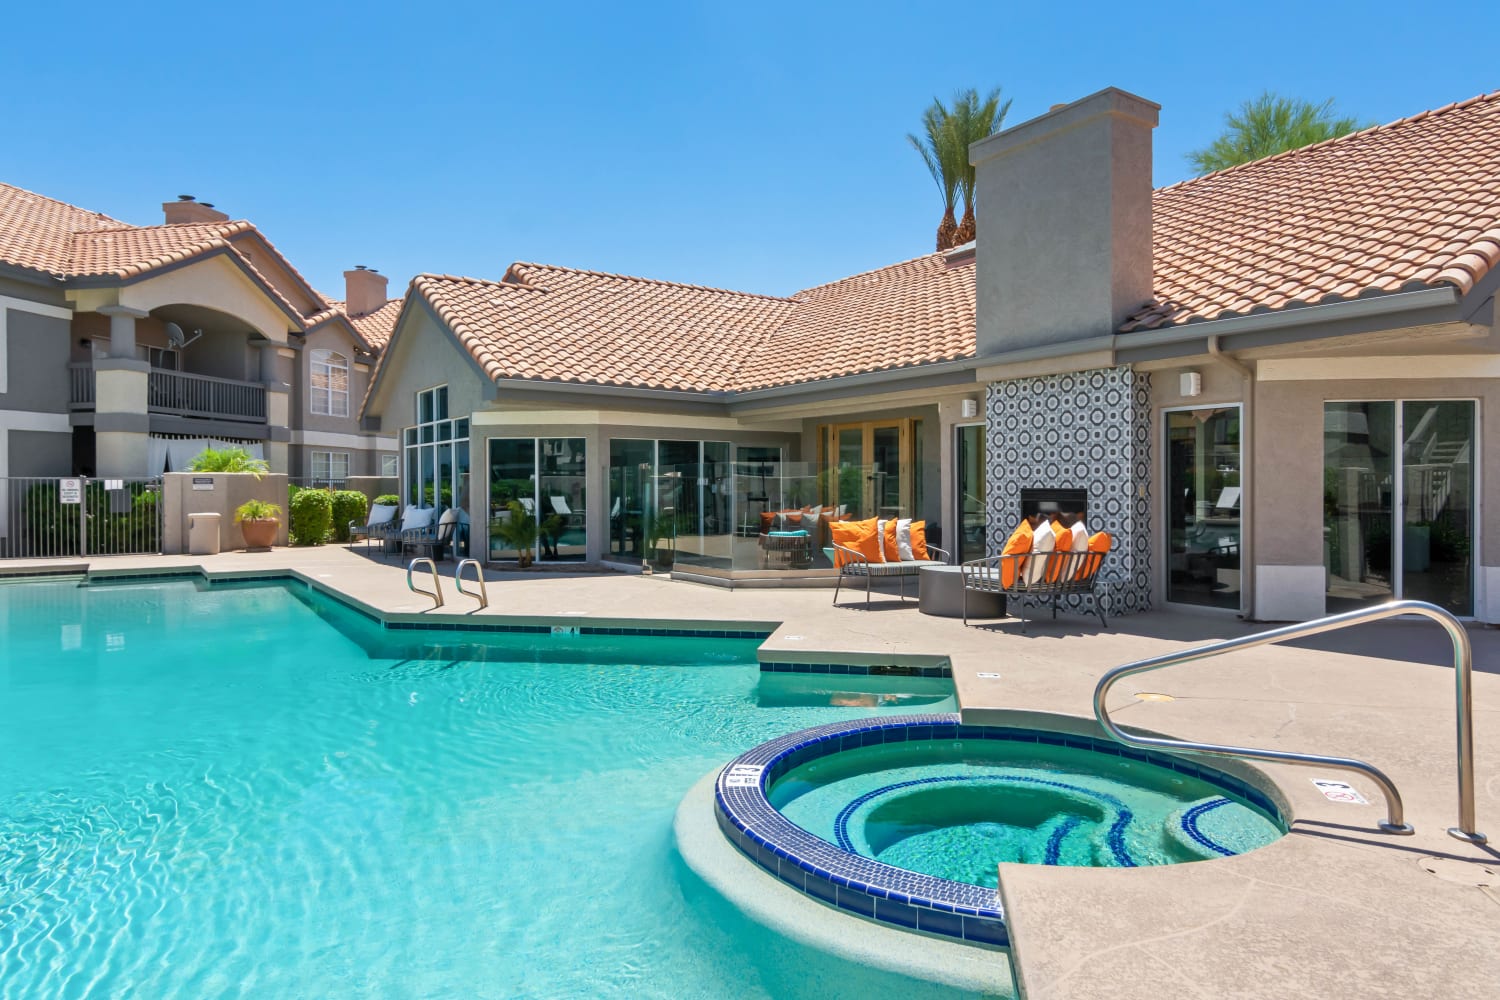 Outdoor community pool and spa at Sonoran Vista Apartments in Scottsdale, Arizona